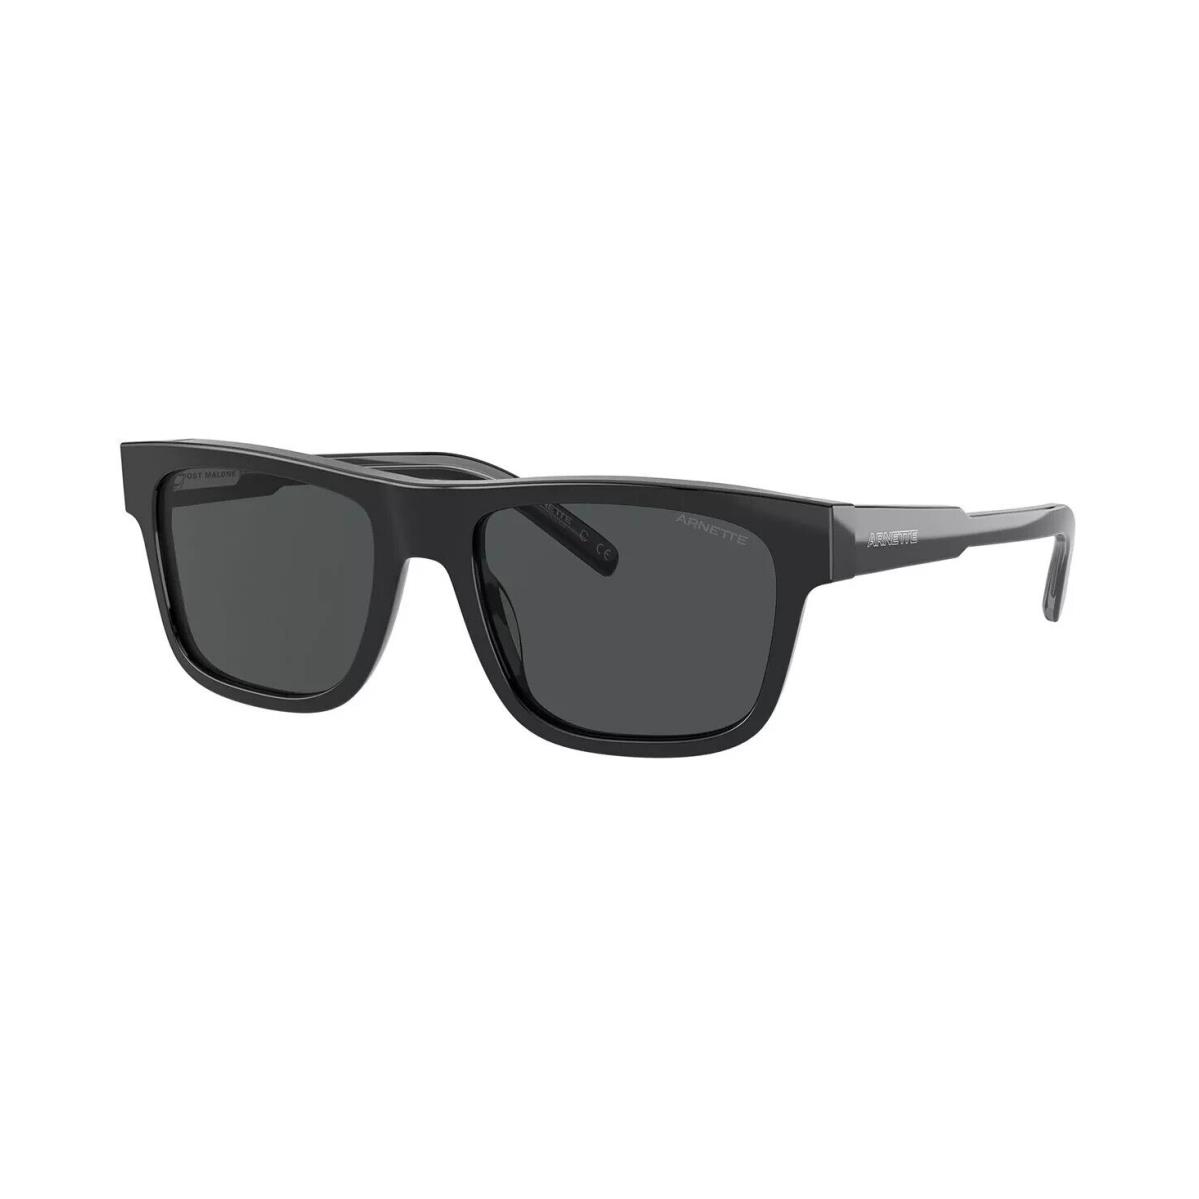 Arnette Post Malone Sunglasses 4279-1200/87 Sustainable Collection Black